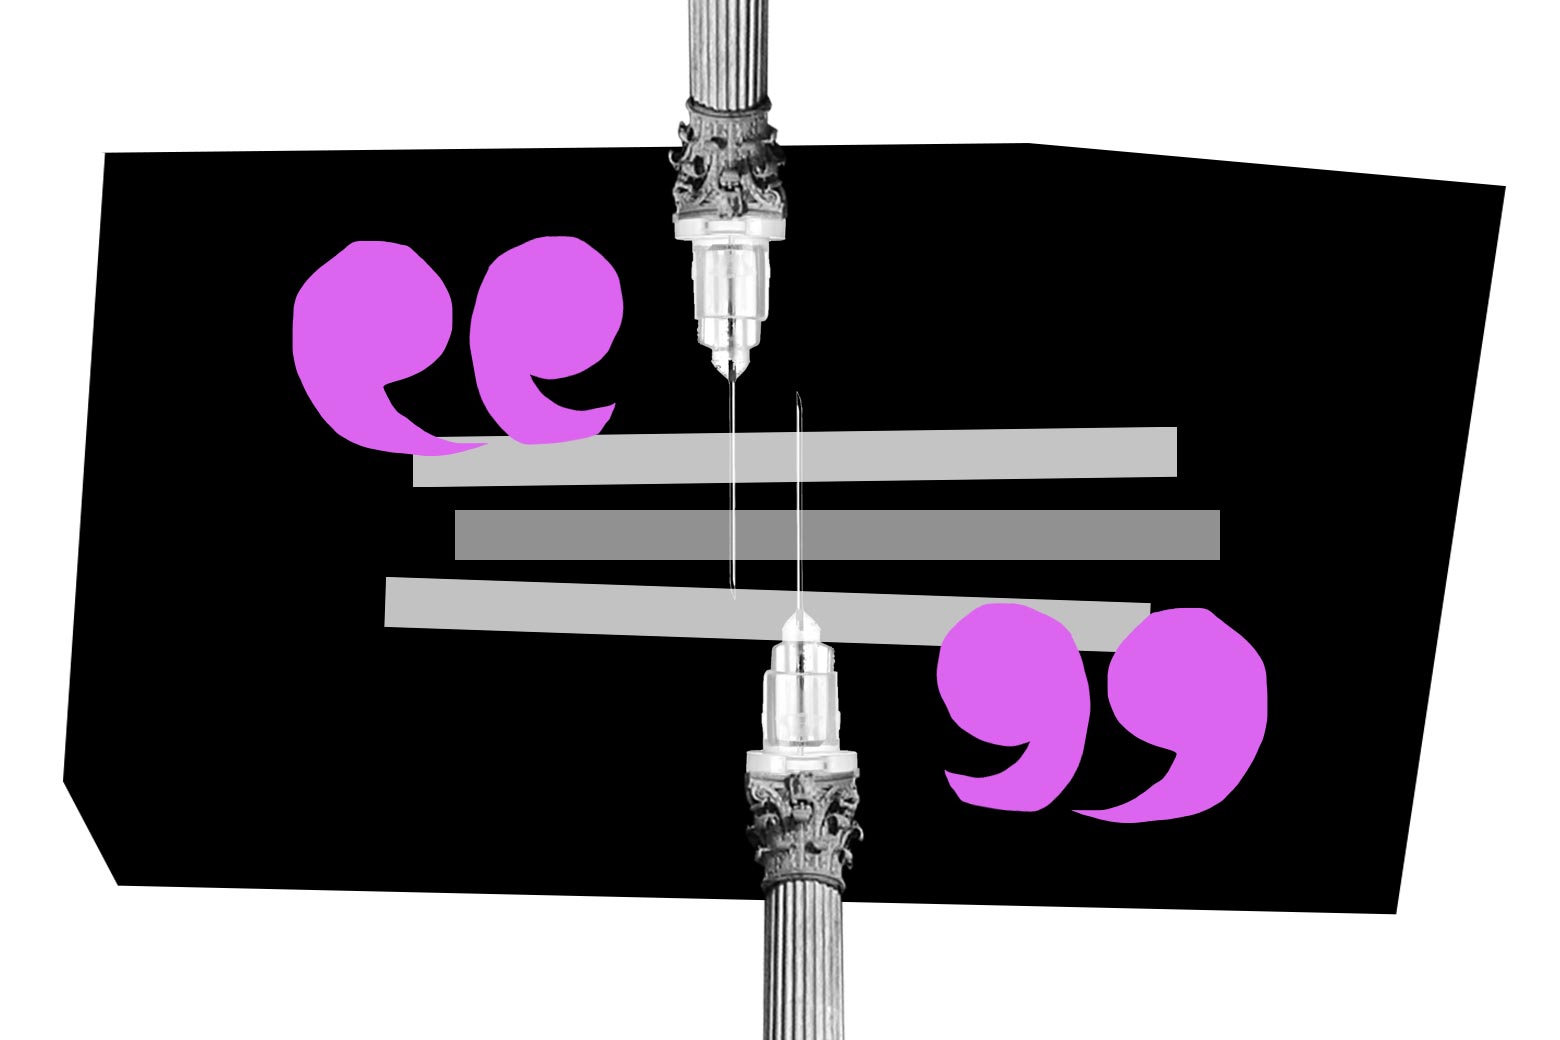 Two needles added on to Supreme Court pillars, on a black background with purple accent quotes.